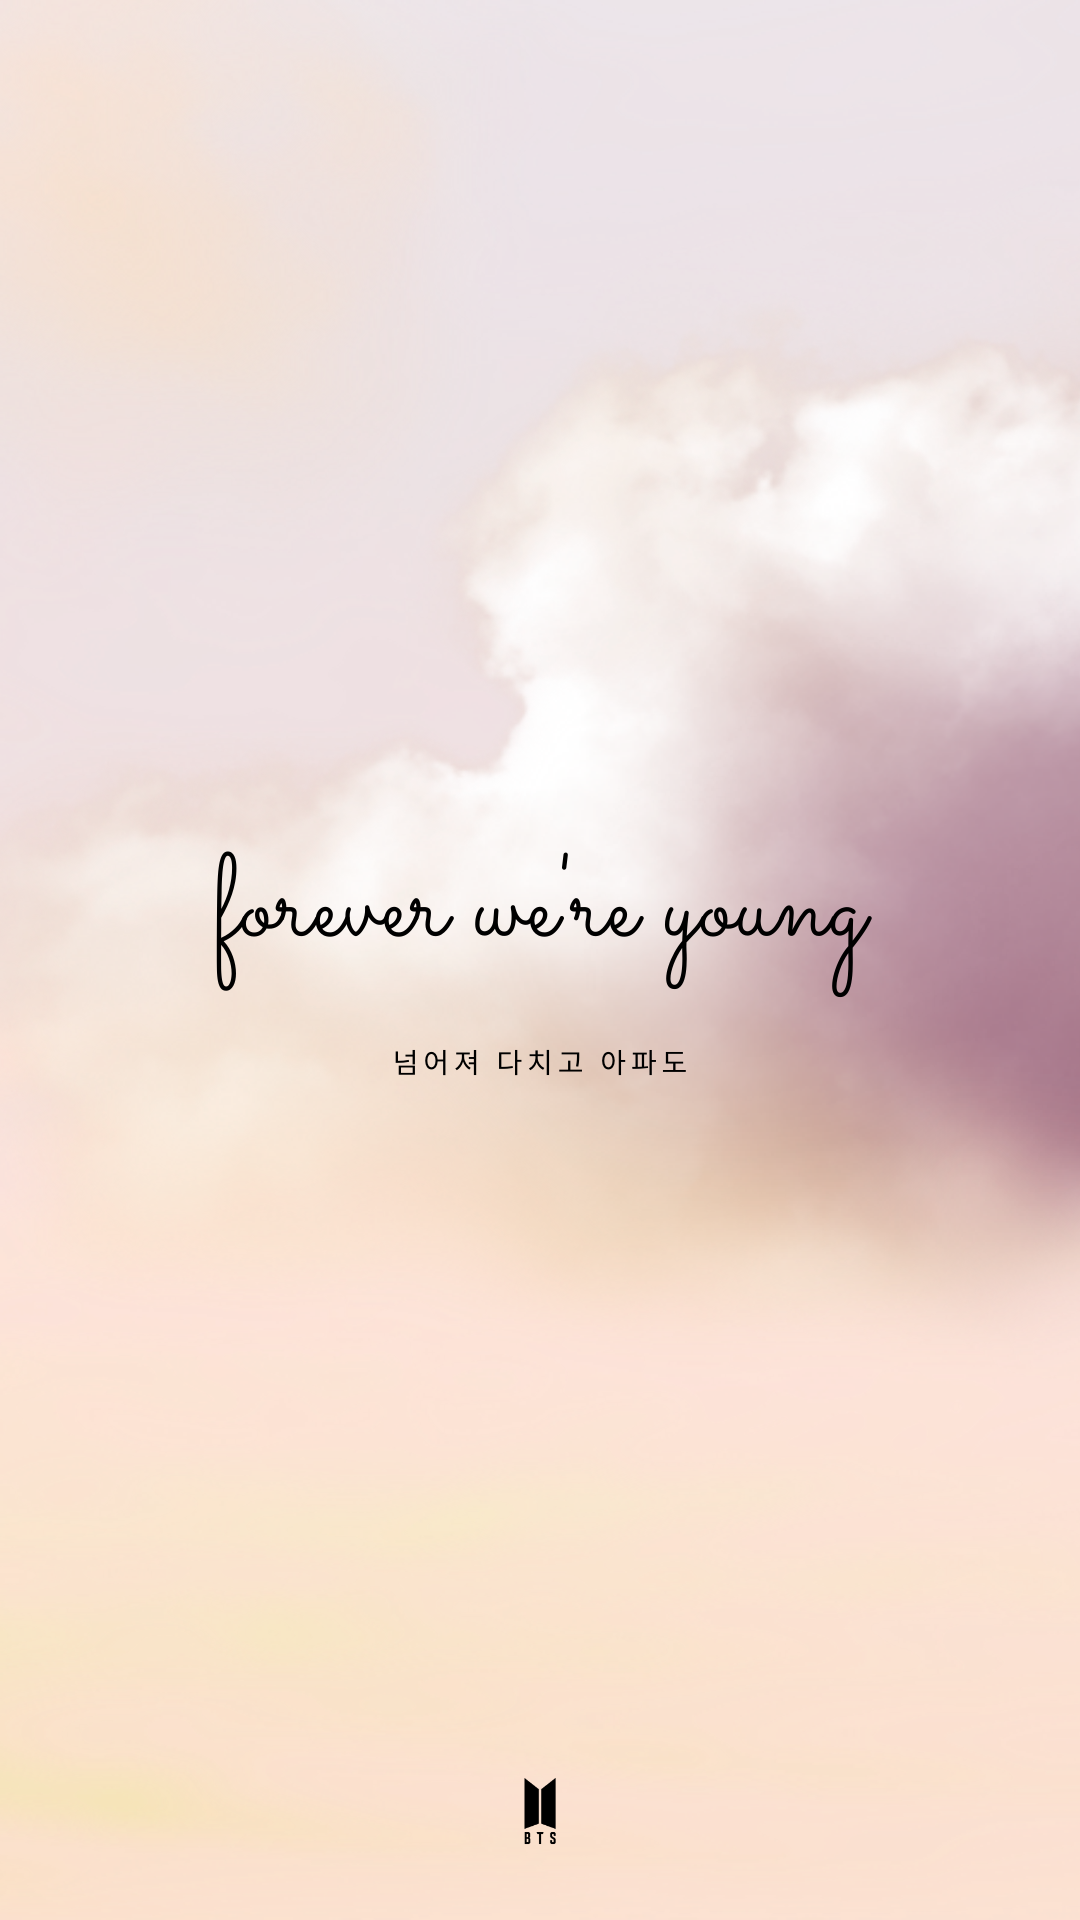 Aesthetic Pictures With Words Wallpapers